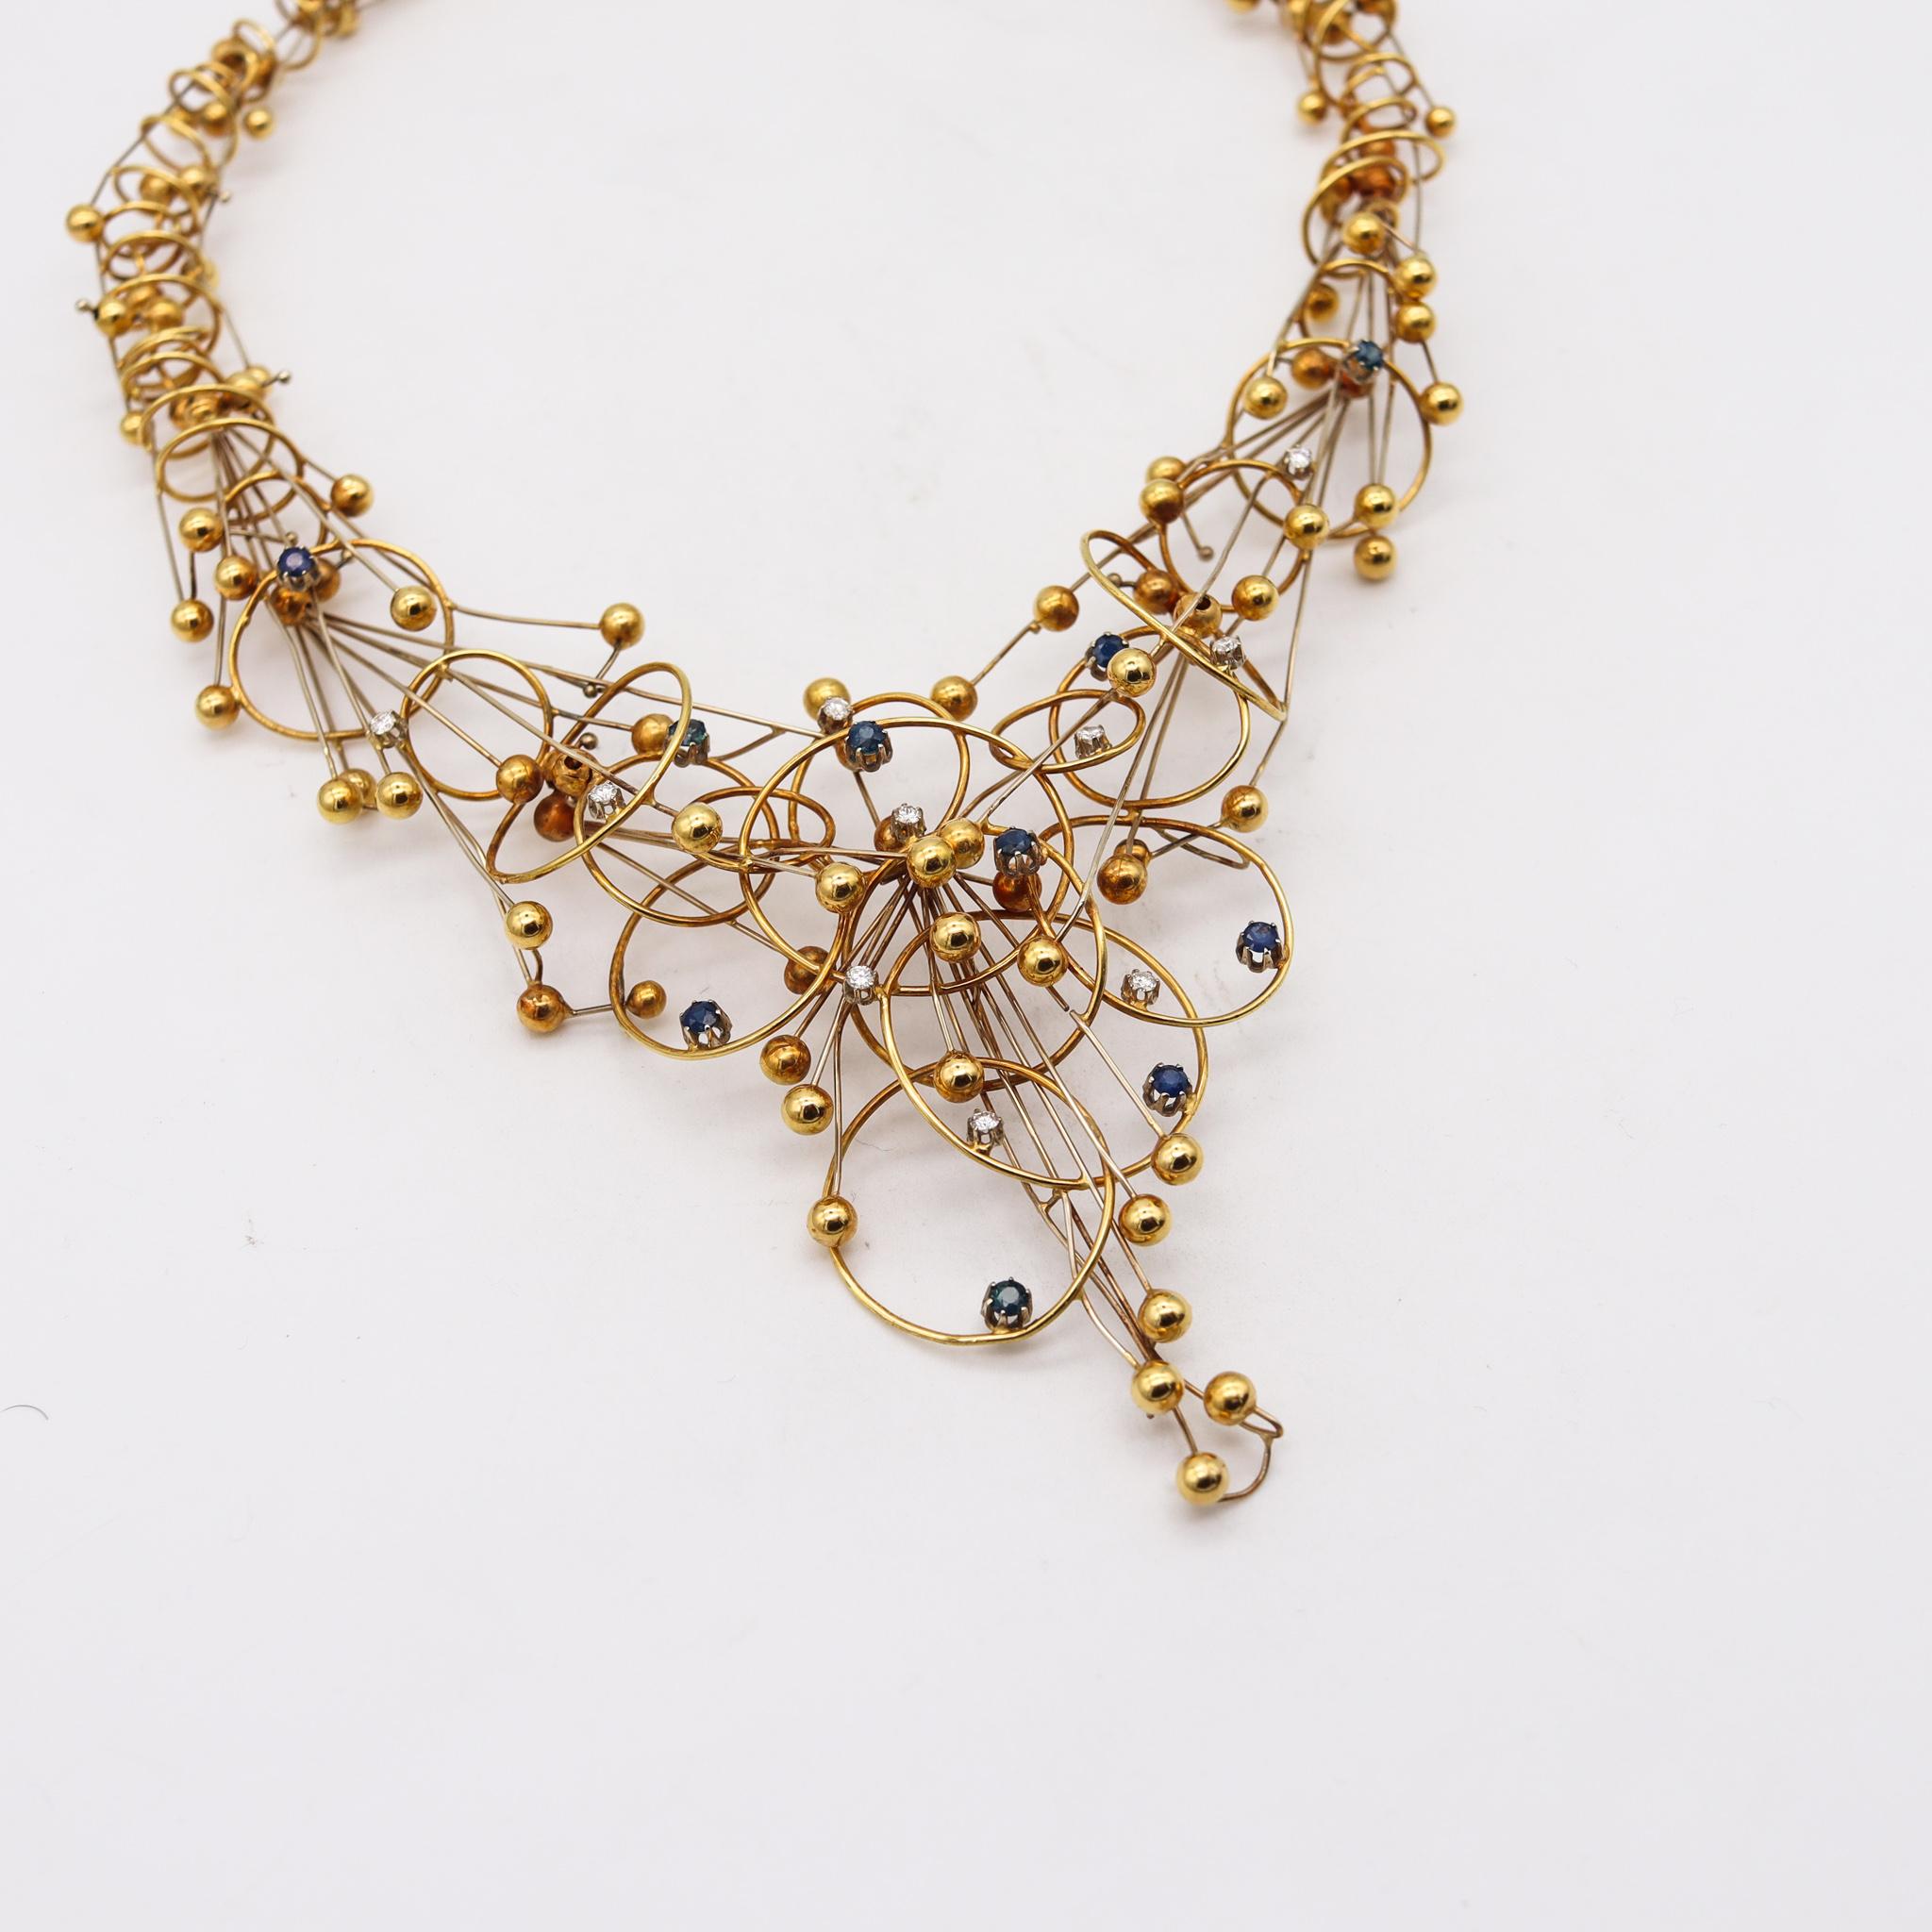 Modernist Studio 1970 Geometric Necklace In 18Kt Gold With Diamonds & Sapphires In Excellent Condition For Sale In Miami, FL